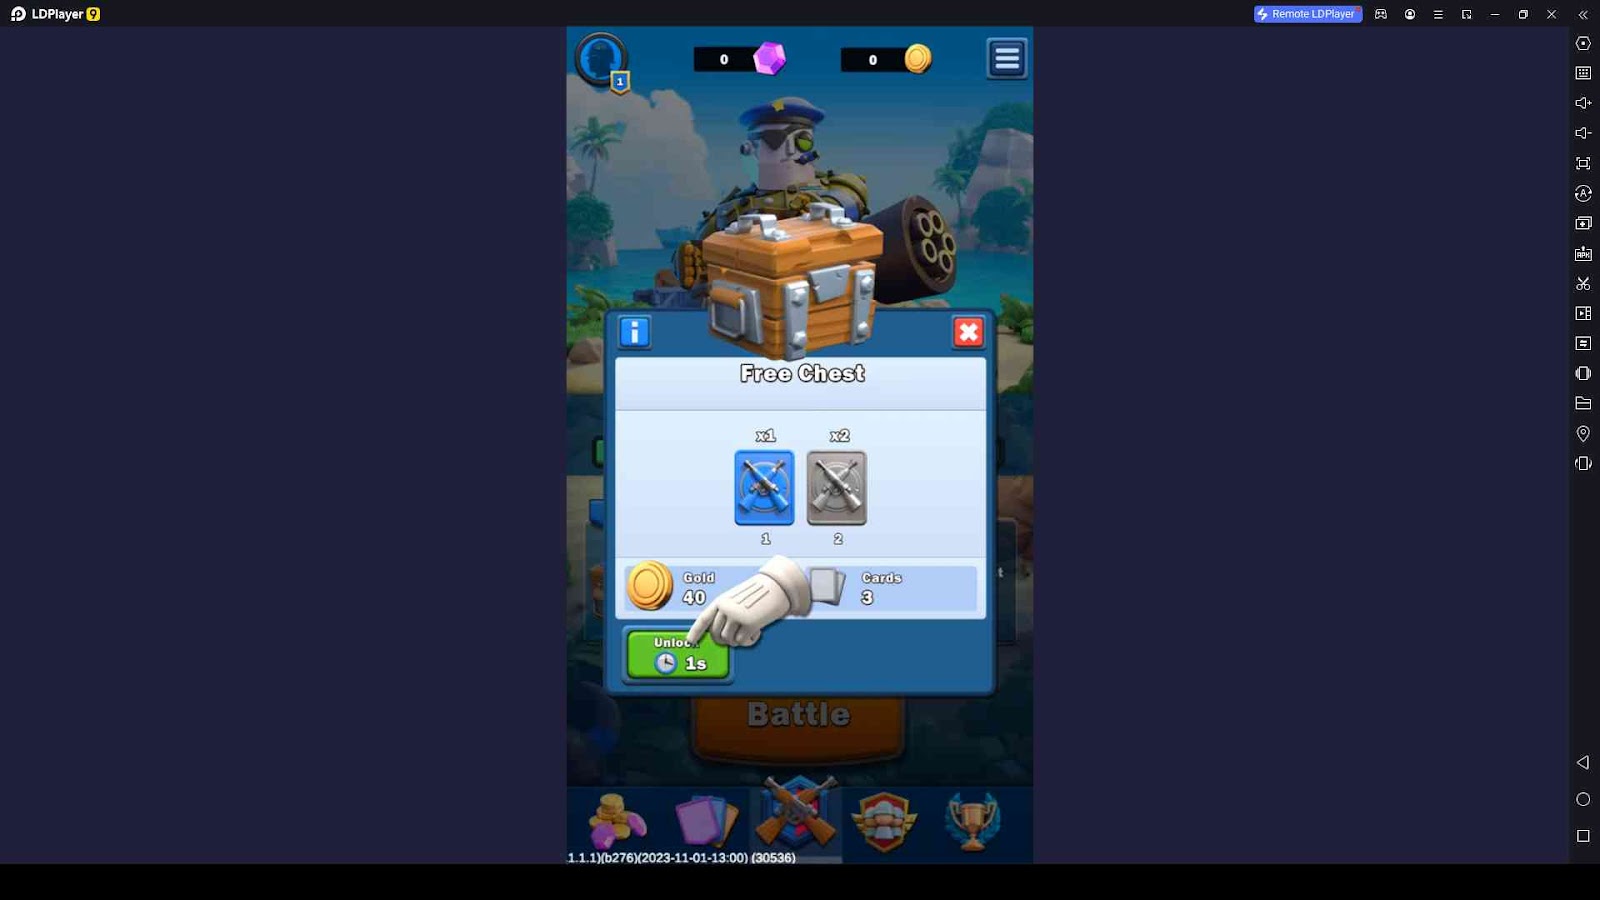 Open More Chests by Watching Ads